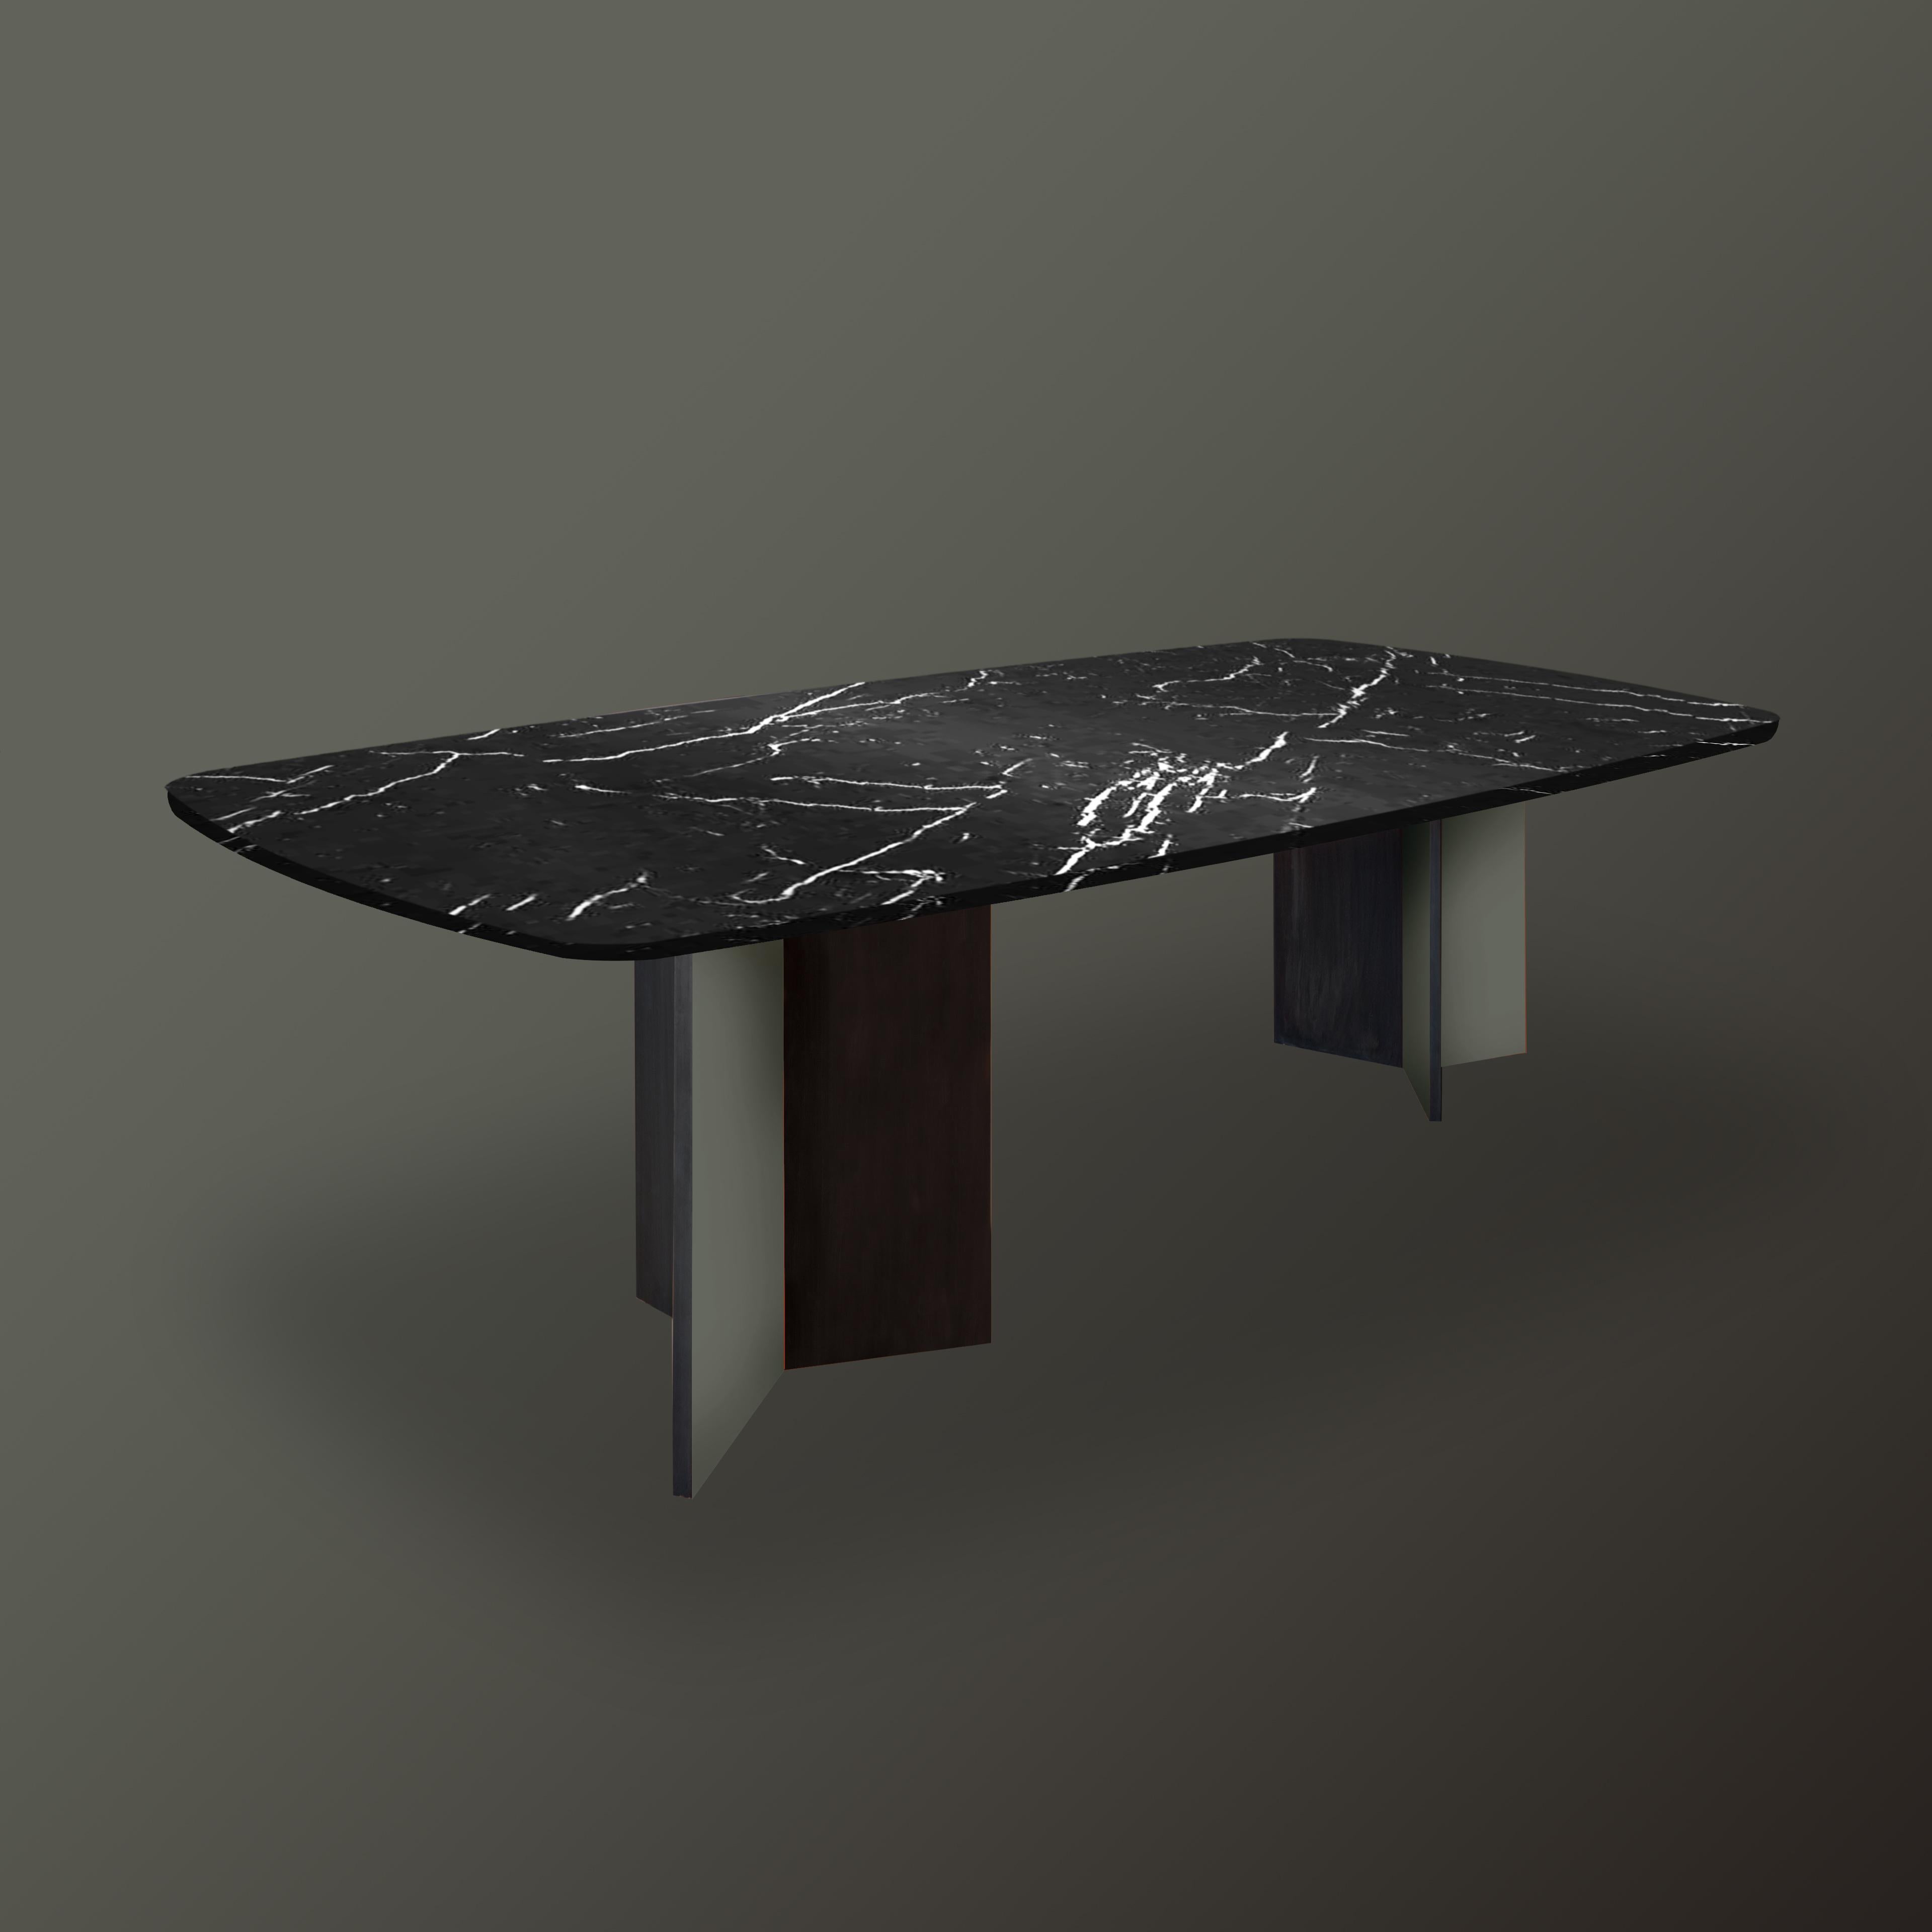 Note that the pattern of the stone will vary as it's a natural stone.

Materials: Spray painted legs, Marquina marble top (Different colours available on request)

The table dimensions permit to seat 8 people – W 200 x D 110 x H 75 cm

The table top